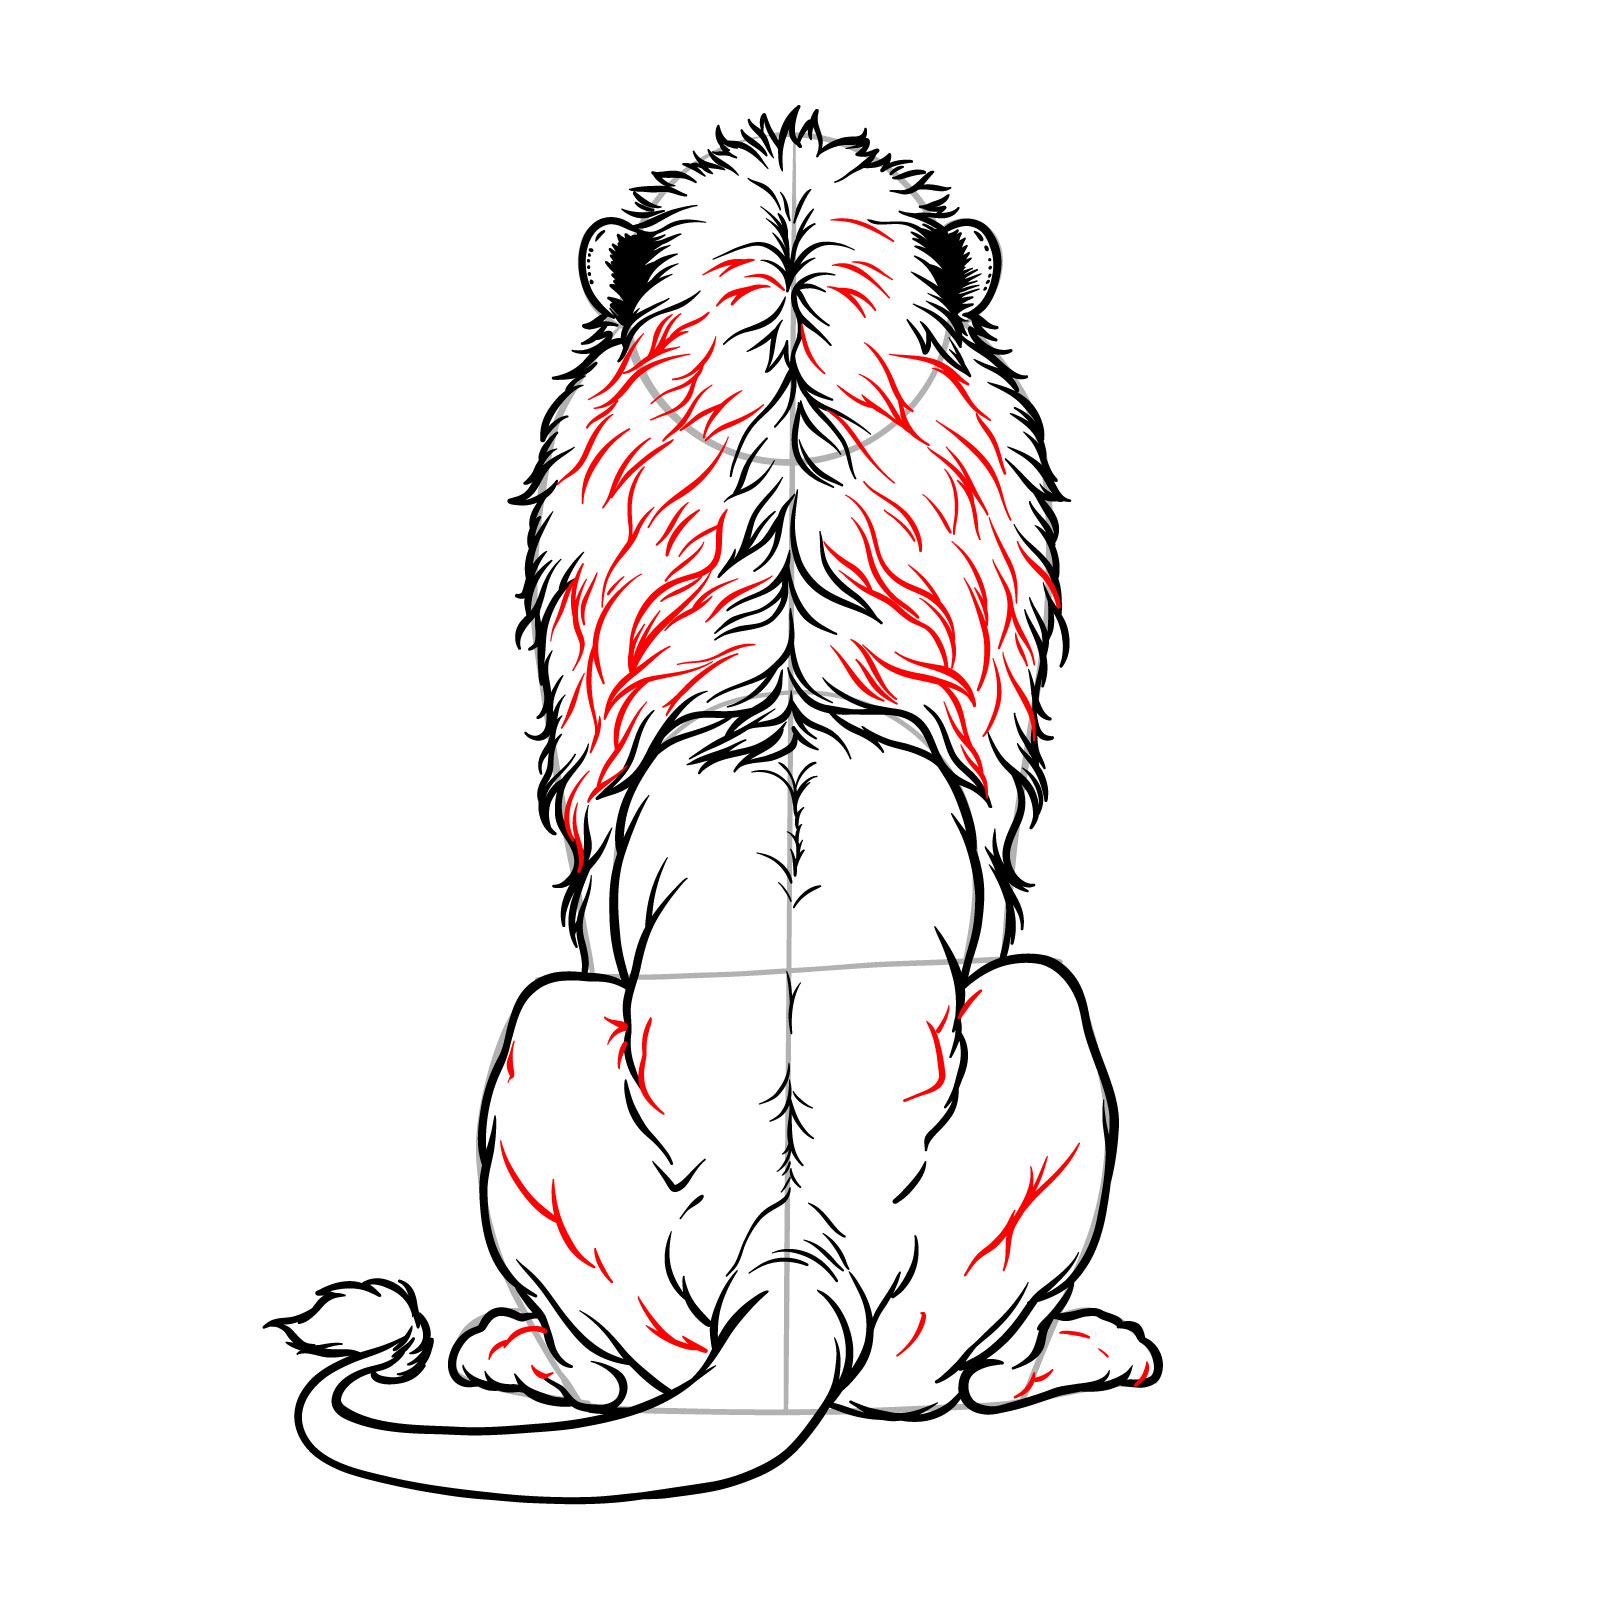 Step 12 in the guide for drawing a sitting lion from the back view, adding fur texture and muscle lines